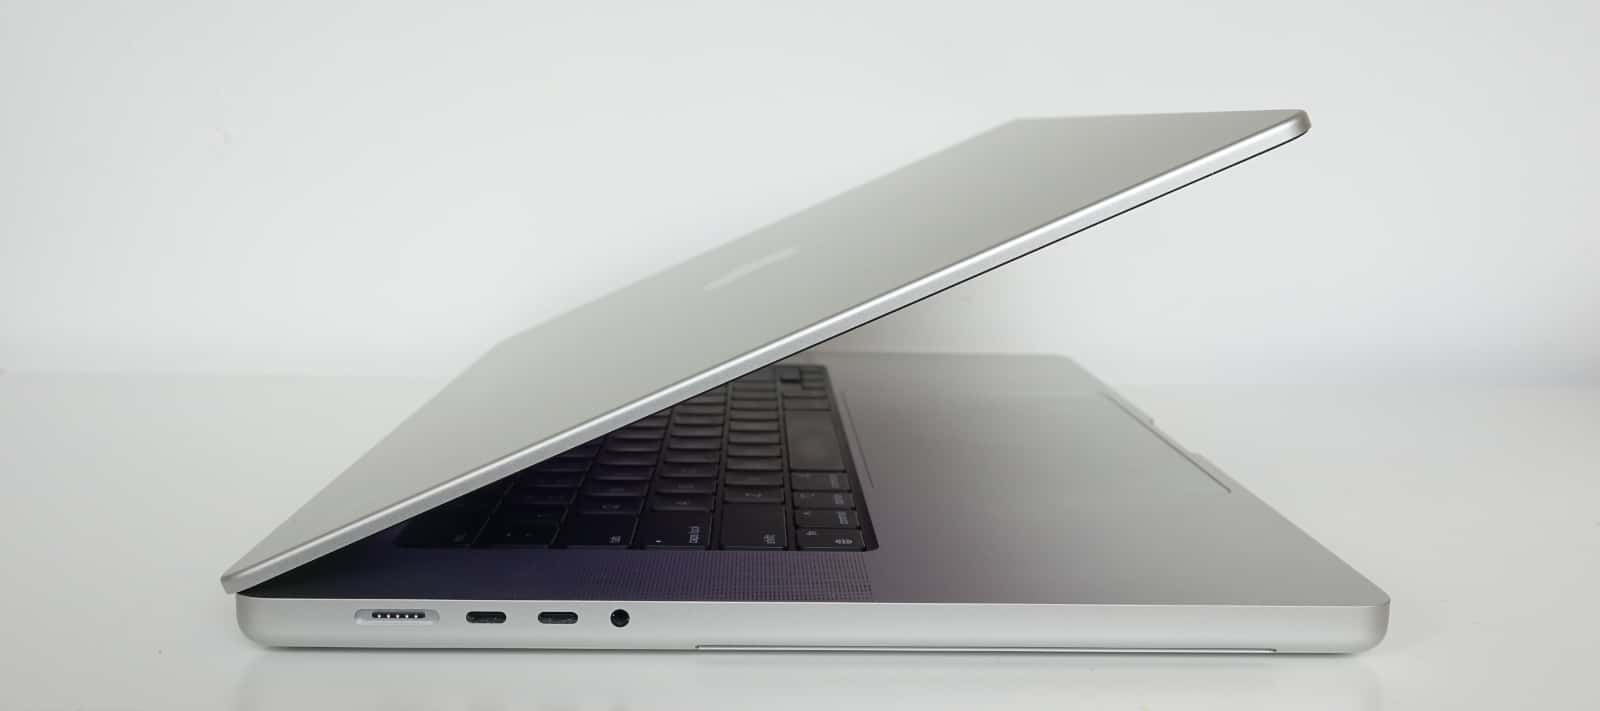 The M1 Apple MacBook Pro 16 reviewed.